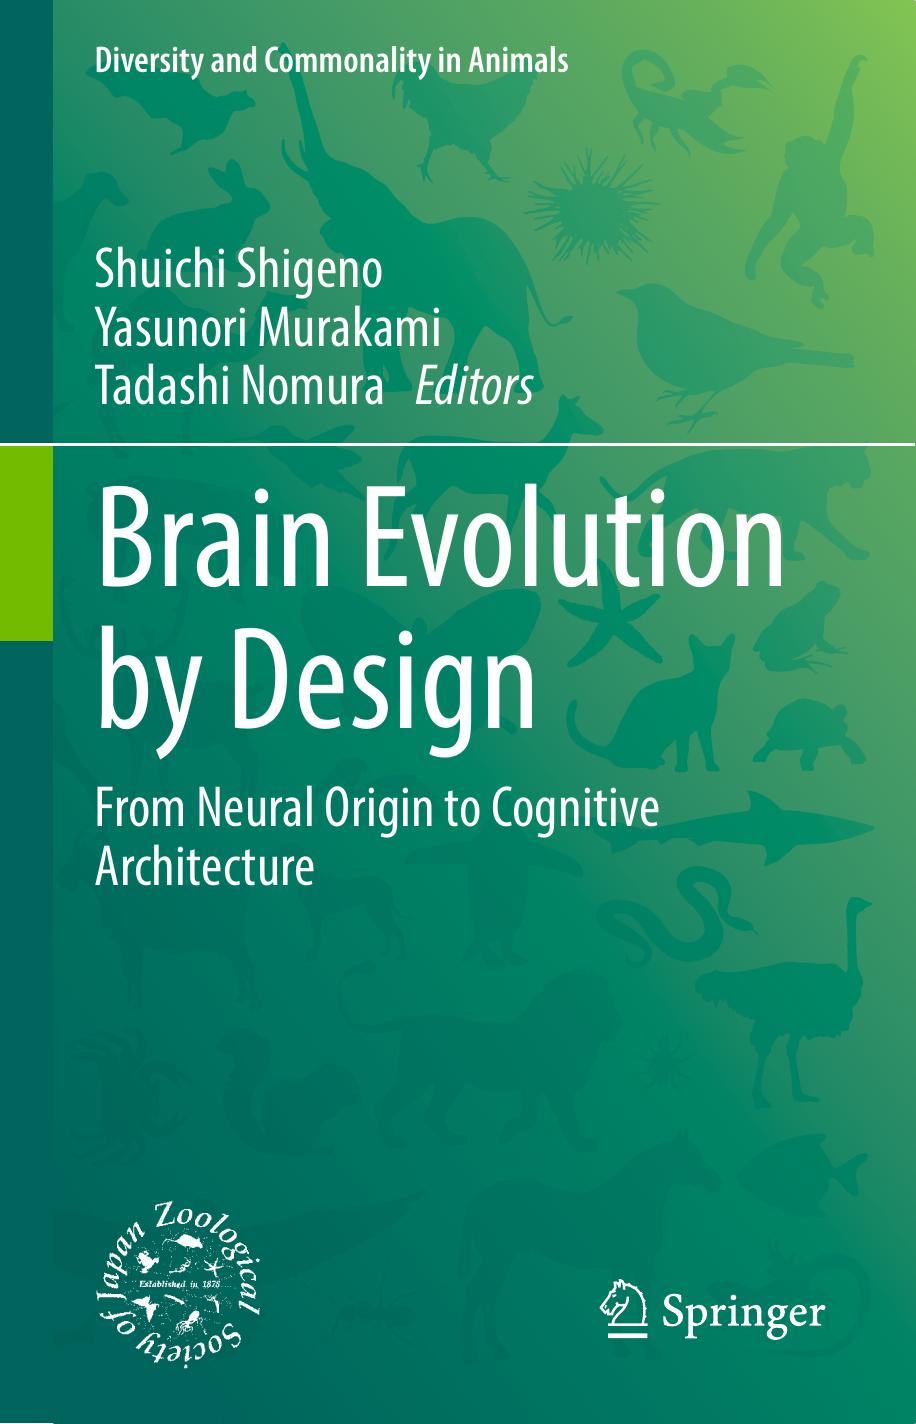 Brain Evolution by Design  From Neural Origin to Cognitive Architecture ( PDFDrive )